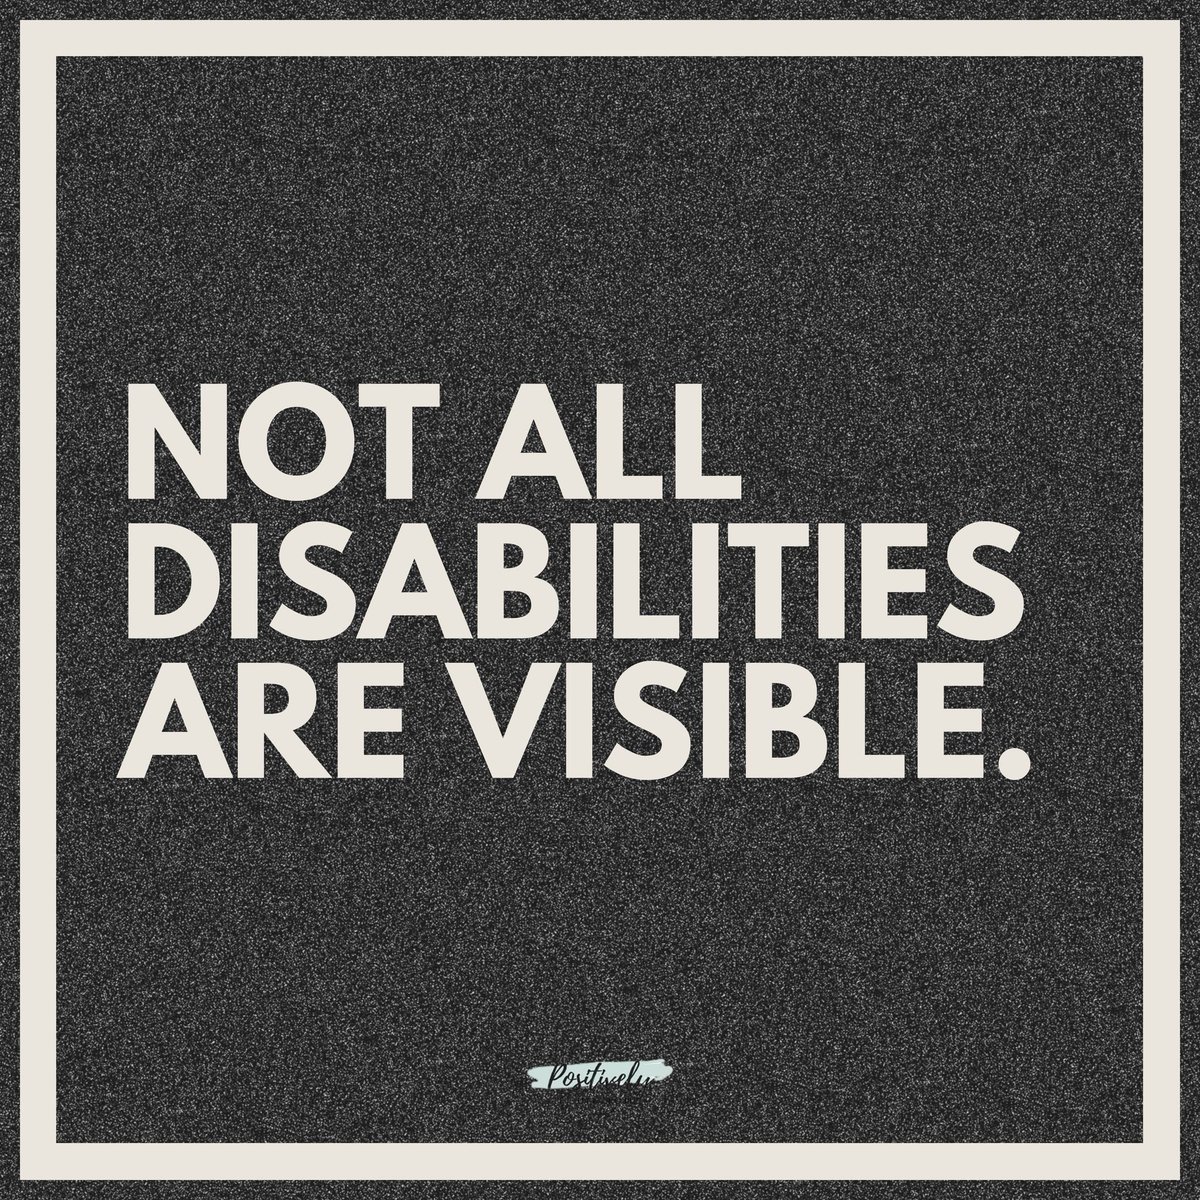 Just because you can't see it, doesn't mean it isn't there.  Disabilities aren't always visible, but kindness should be.

#chronicillness #chronicpain #invisibleillness #spoonie